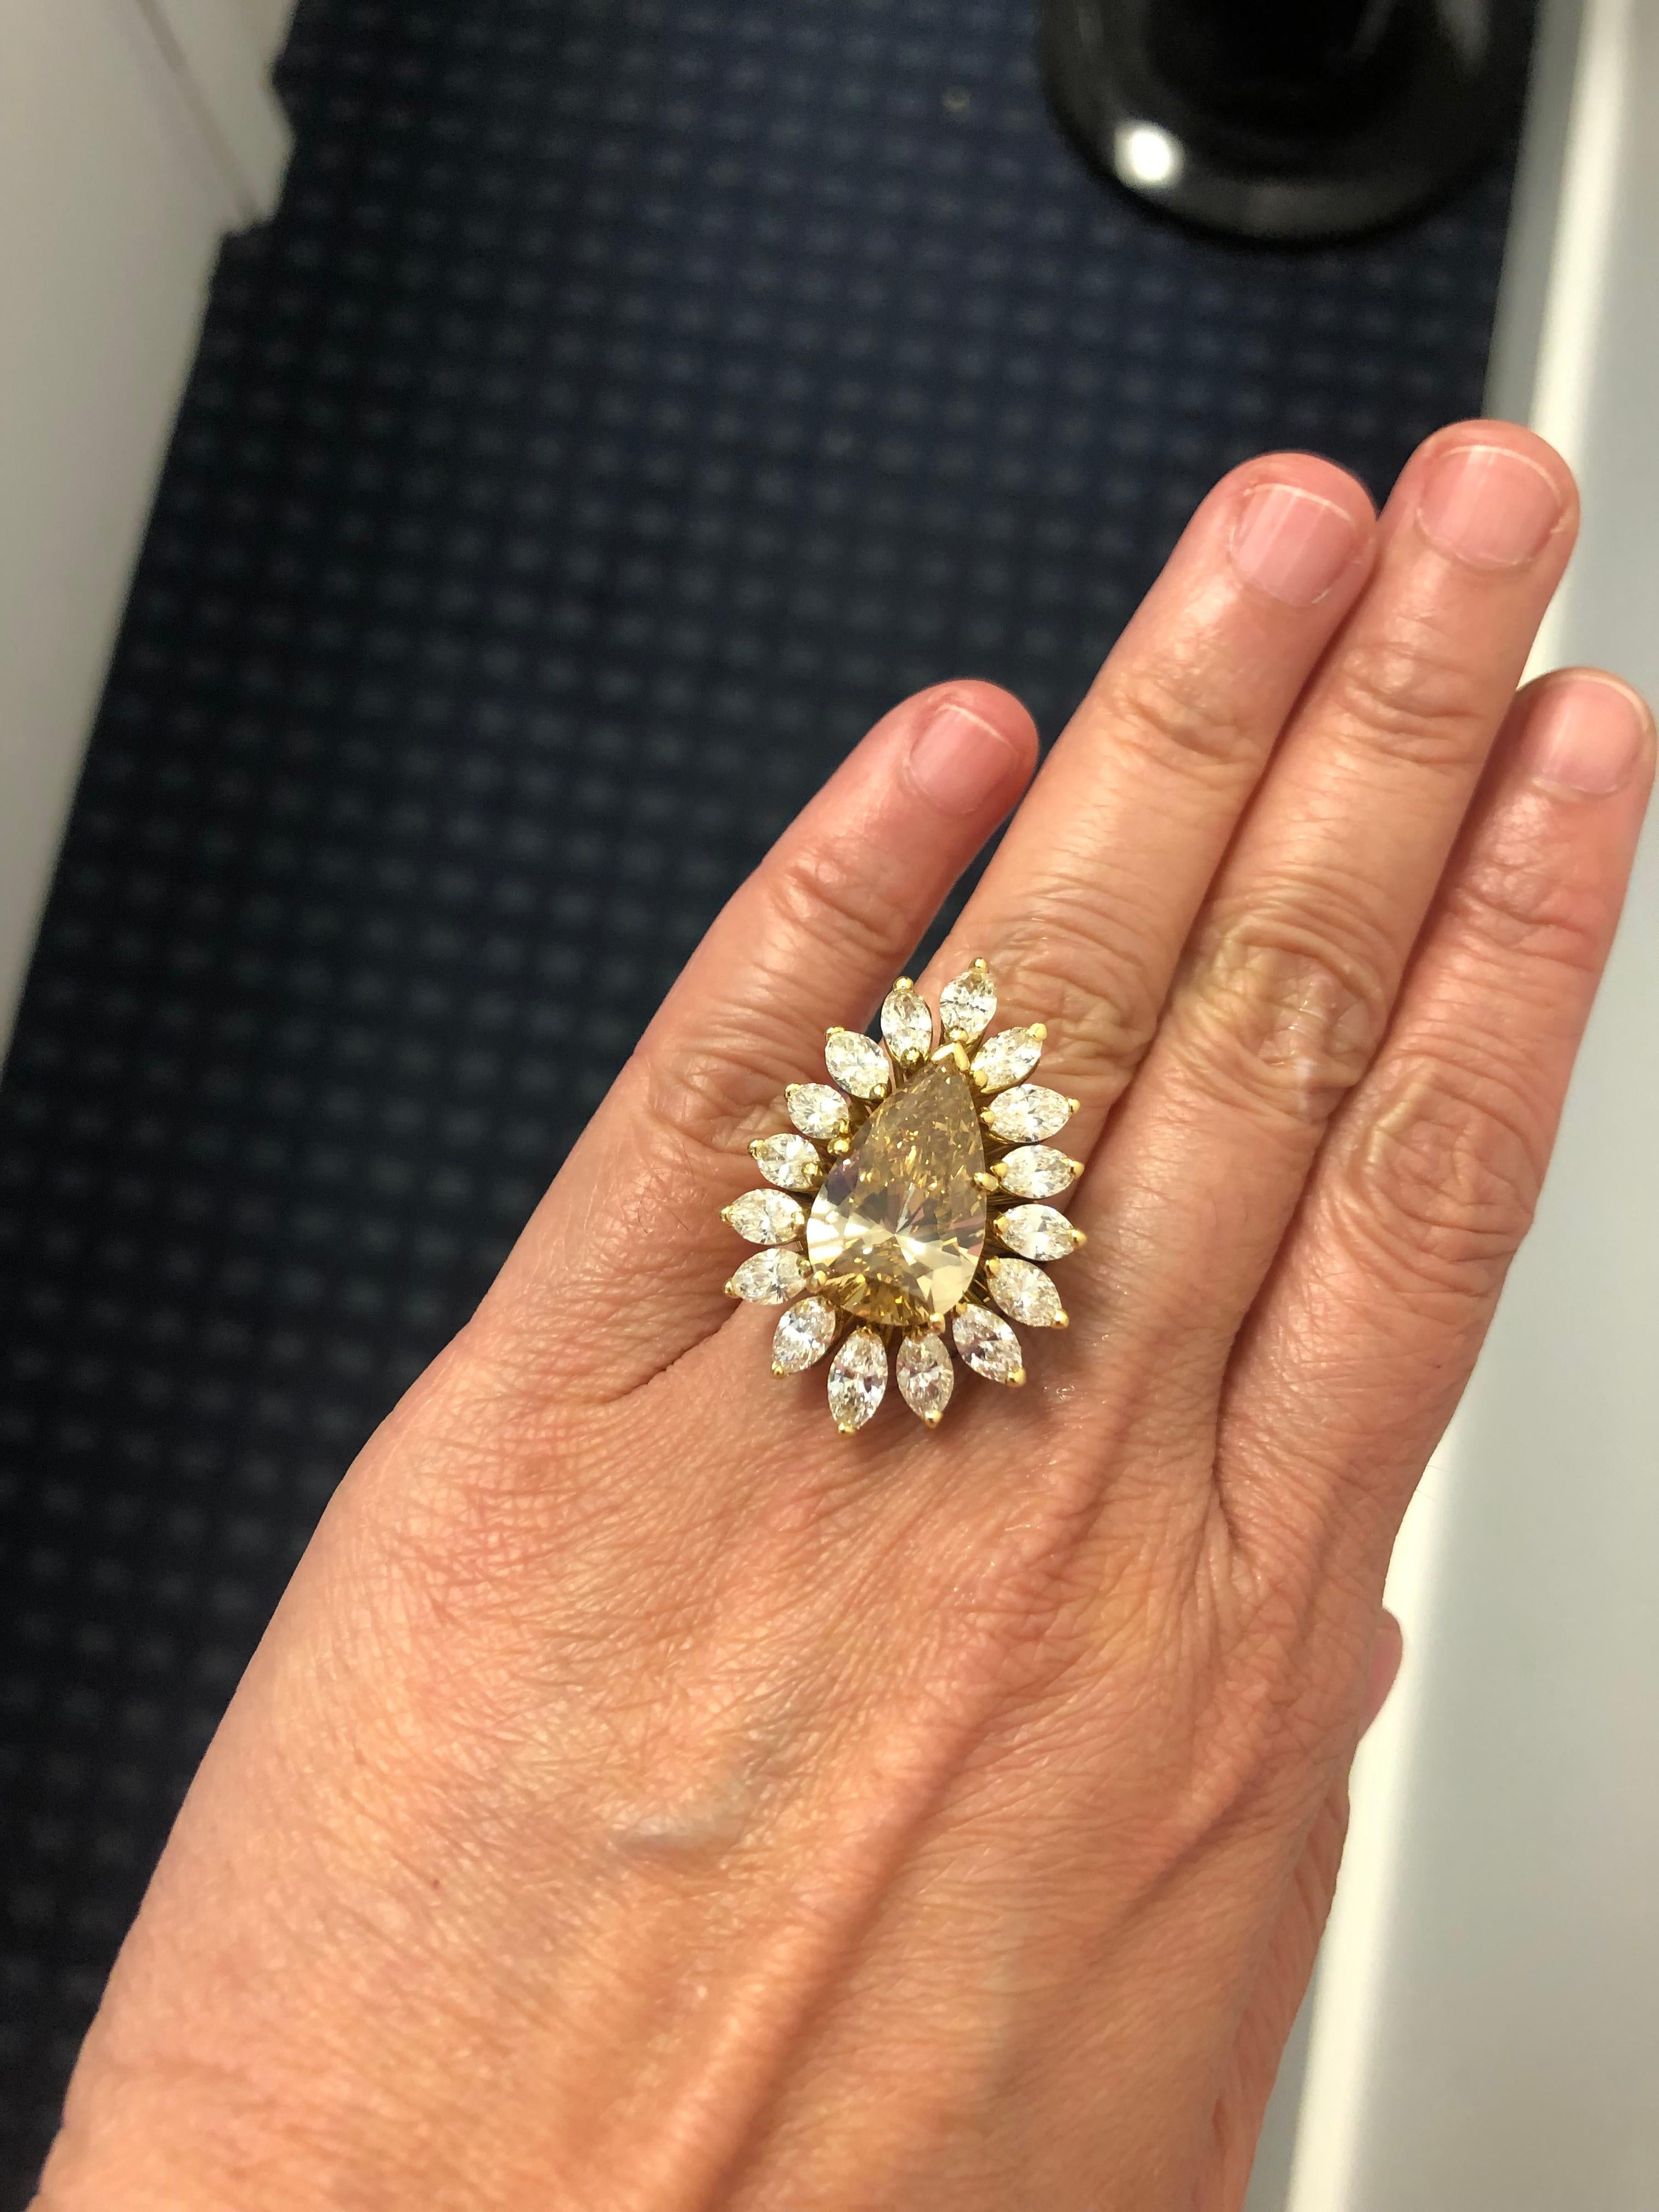 A magnificent ring centering one large pear shaped fancy brown yellow diamond SI1 of natural color, surrounded with a frame of marquise shaped diamonds weighing approximately 7.99 carats, finely mounted in 18k yellow gold. A brilliant ring that